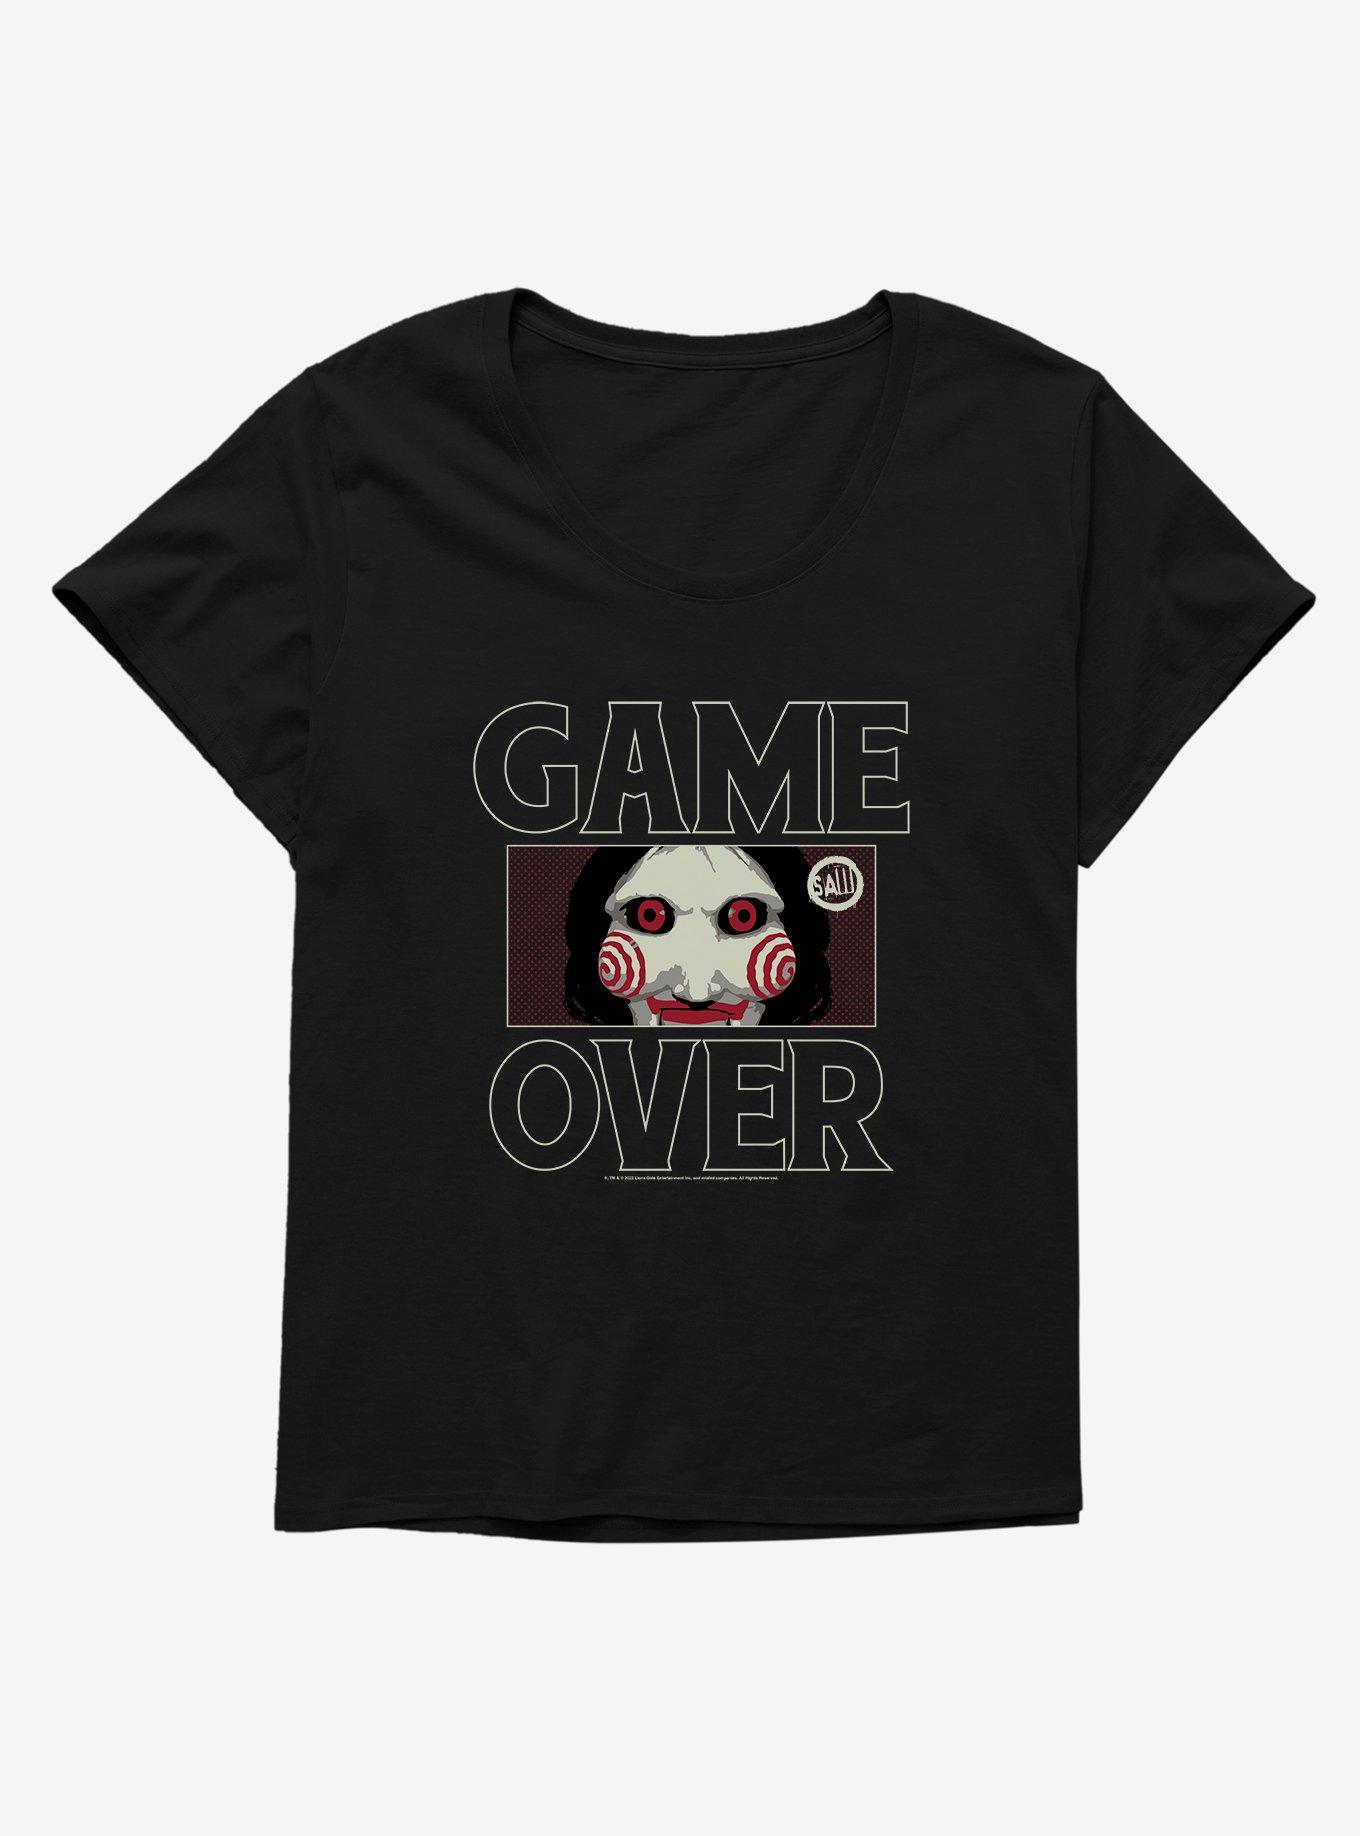 Saw Game Over Womens T-Shirt Plus Size, BLACK, hi-res